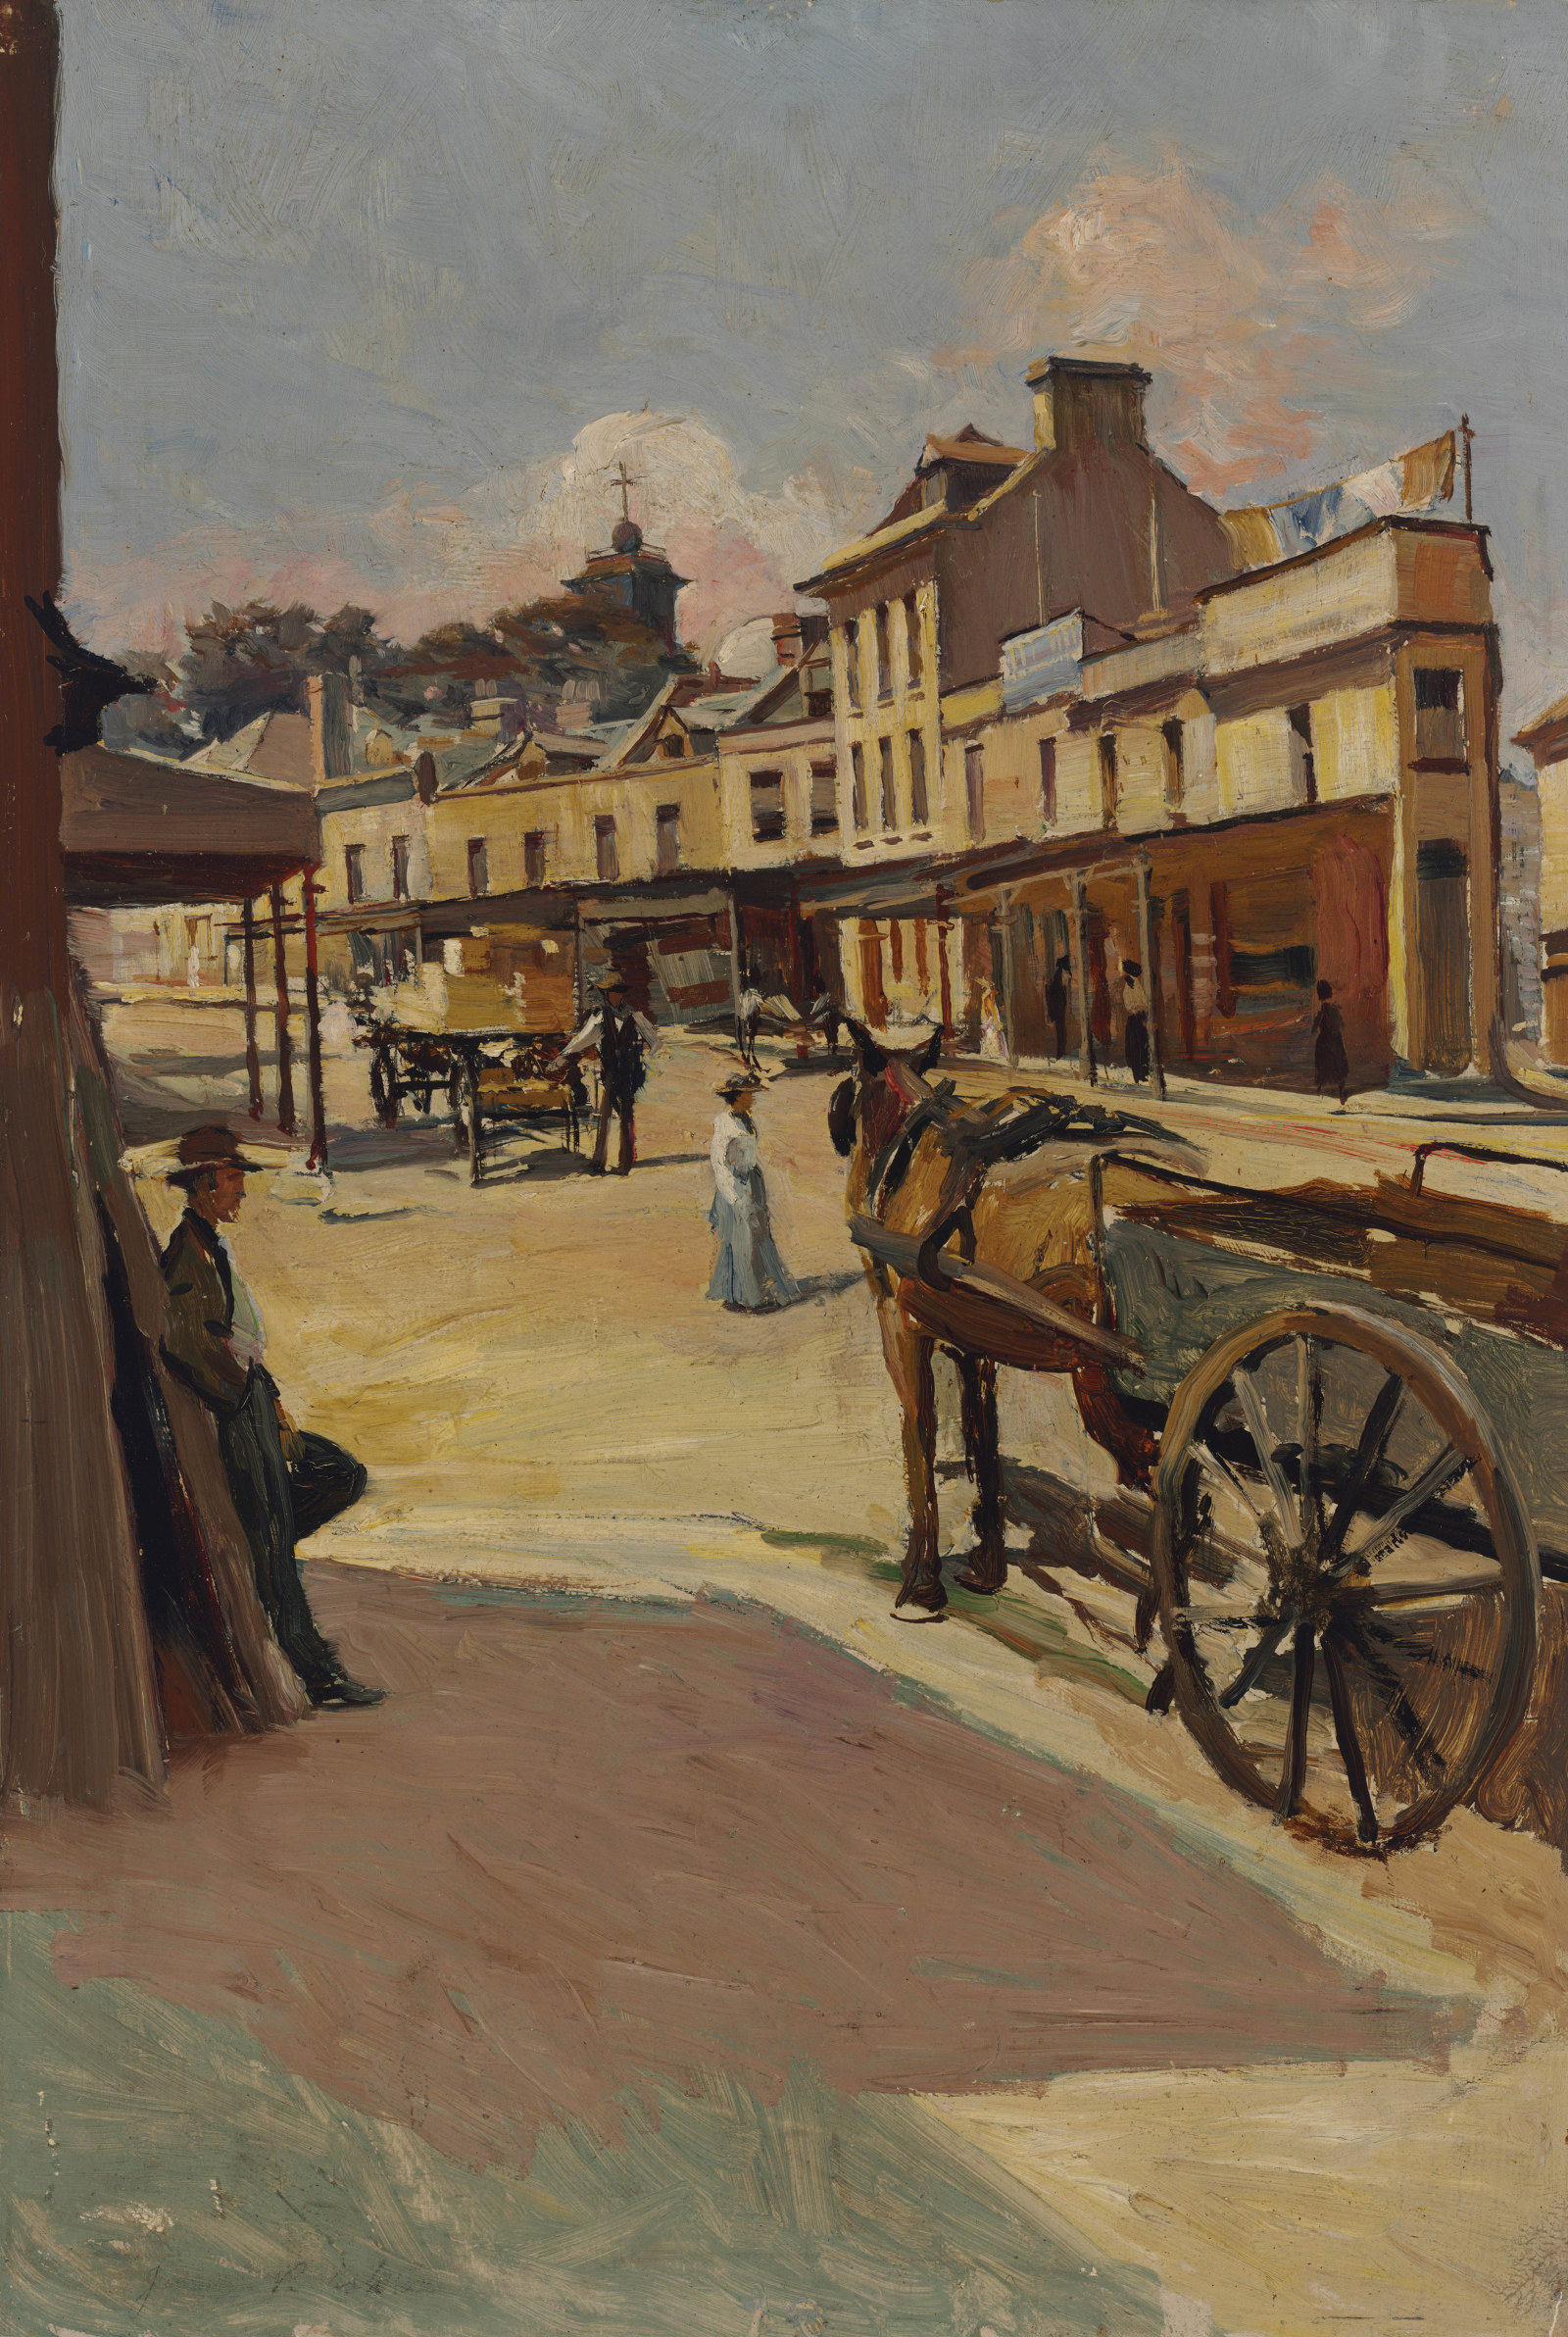 Painting of street scene. A harose and cart wait in the foreground and figures are shown going about their business in the shops shown in the painting's background.